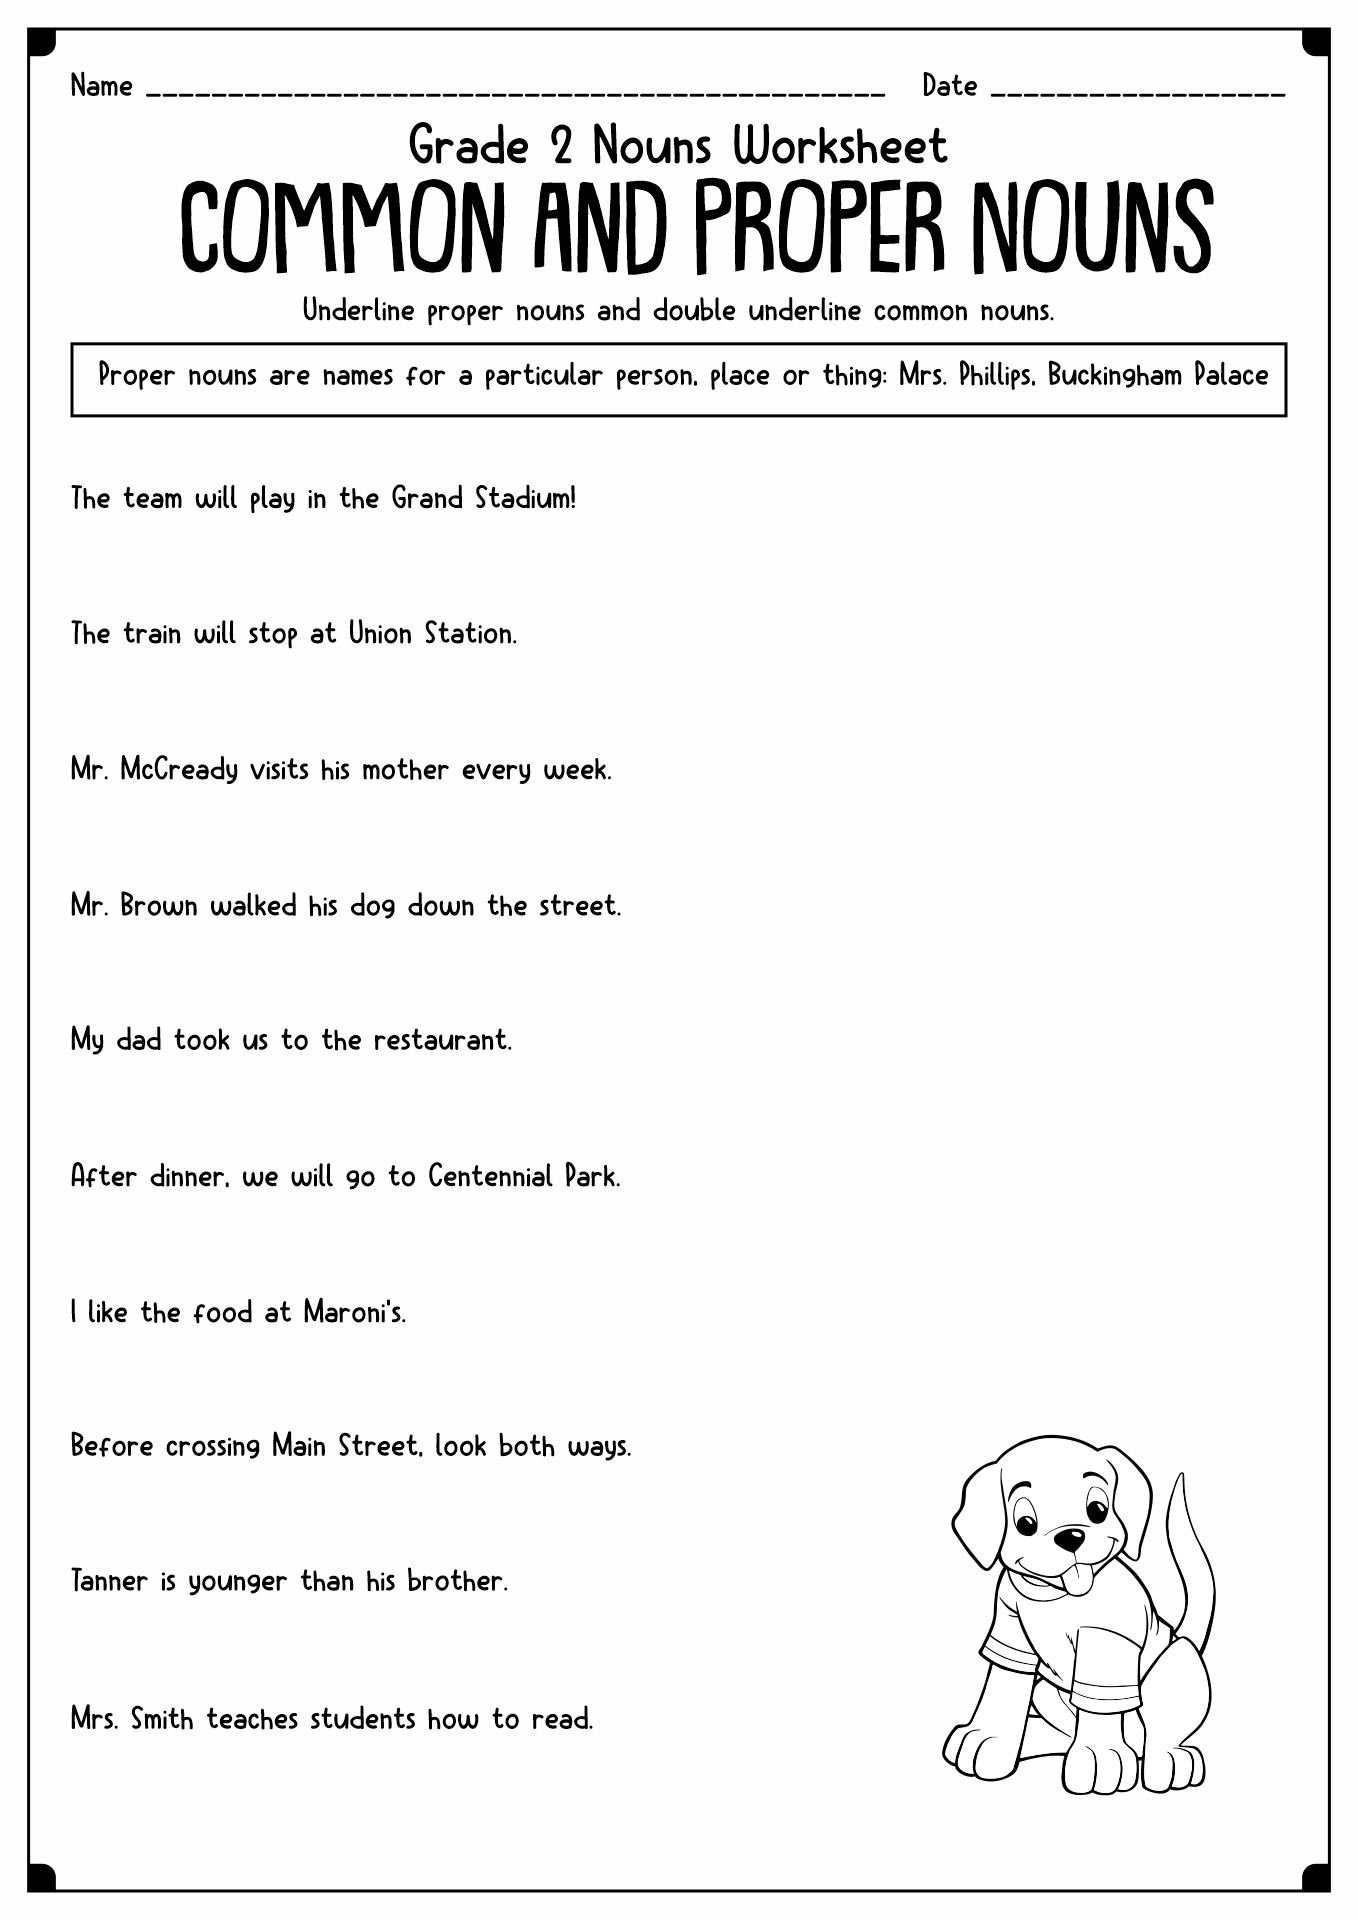 18 Best Images Of Proper Noun Worksheets For First Grade Common And